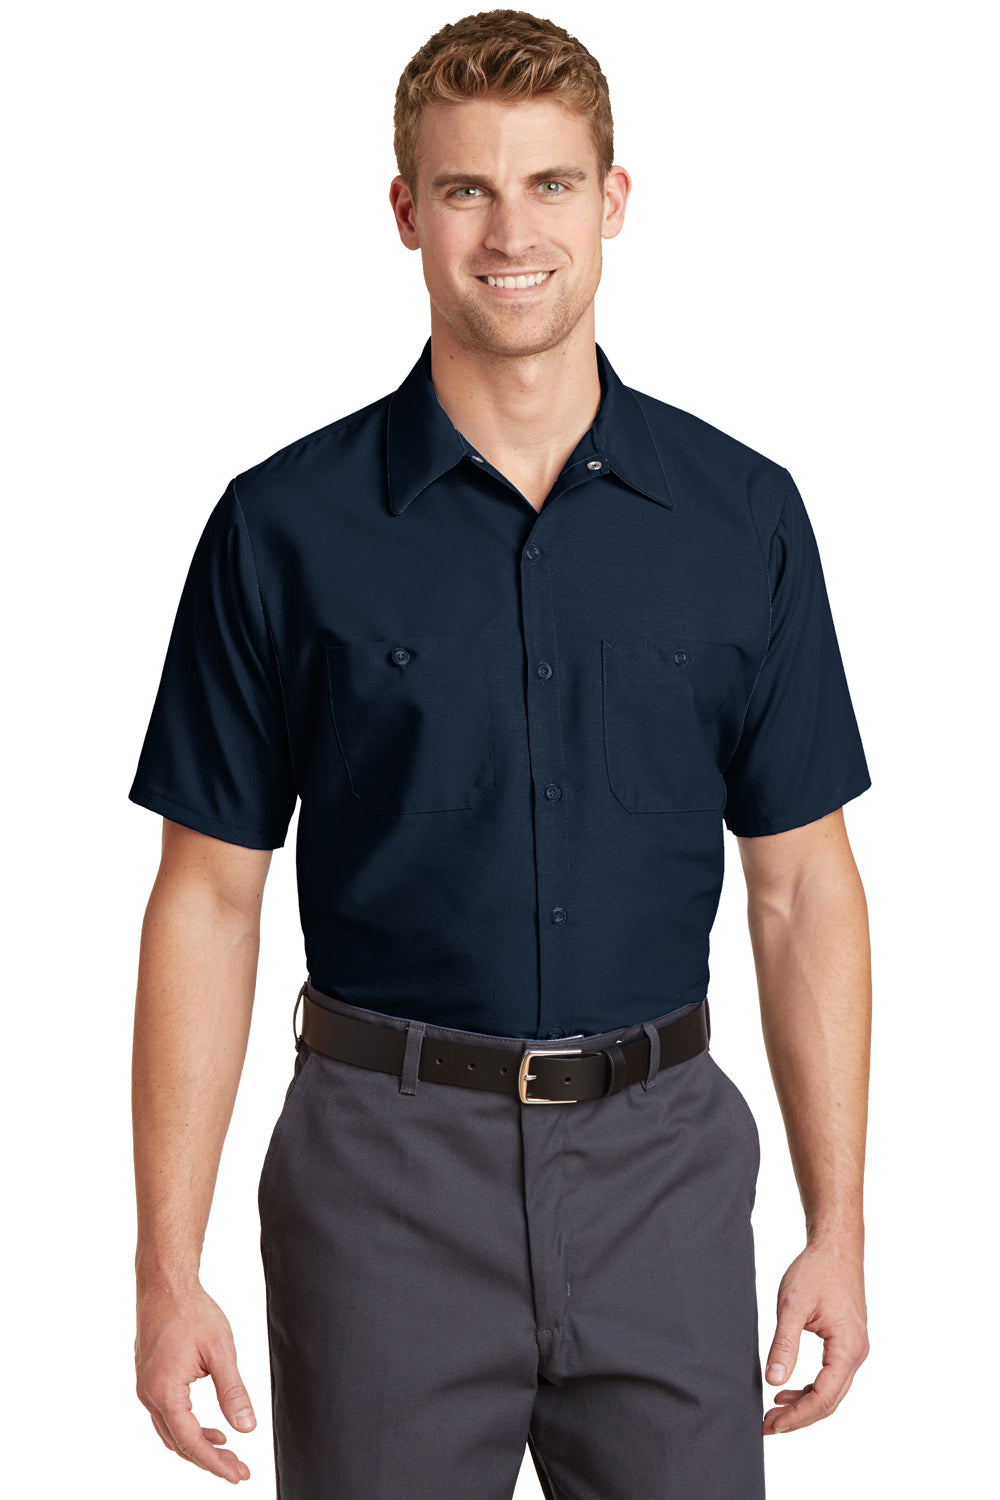 Red Kap SP24 Mens Industrial Moisture Wicking Short Sleeve Button Down Shirt w/ Double Pockets Navy Blue Front